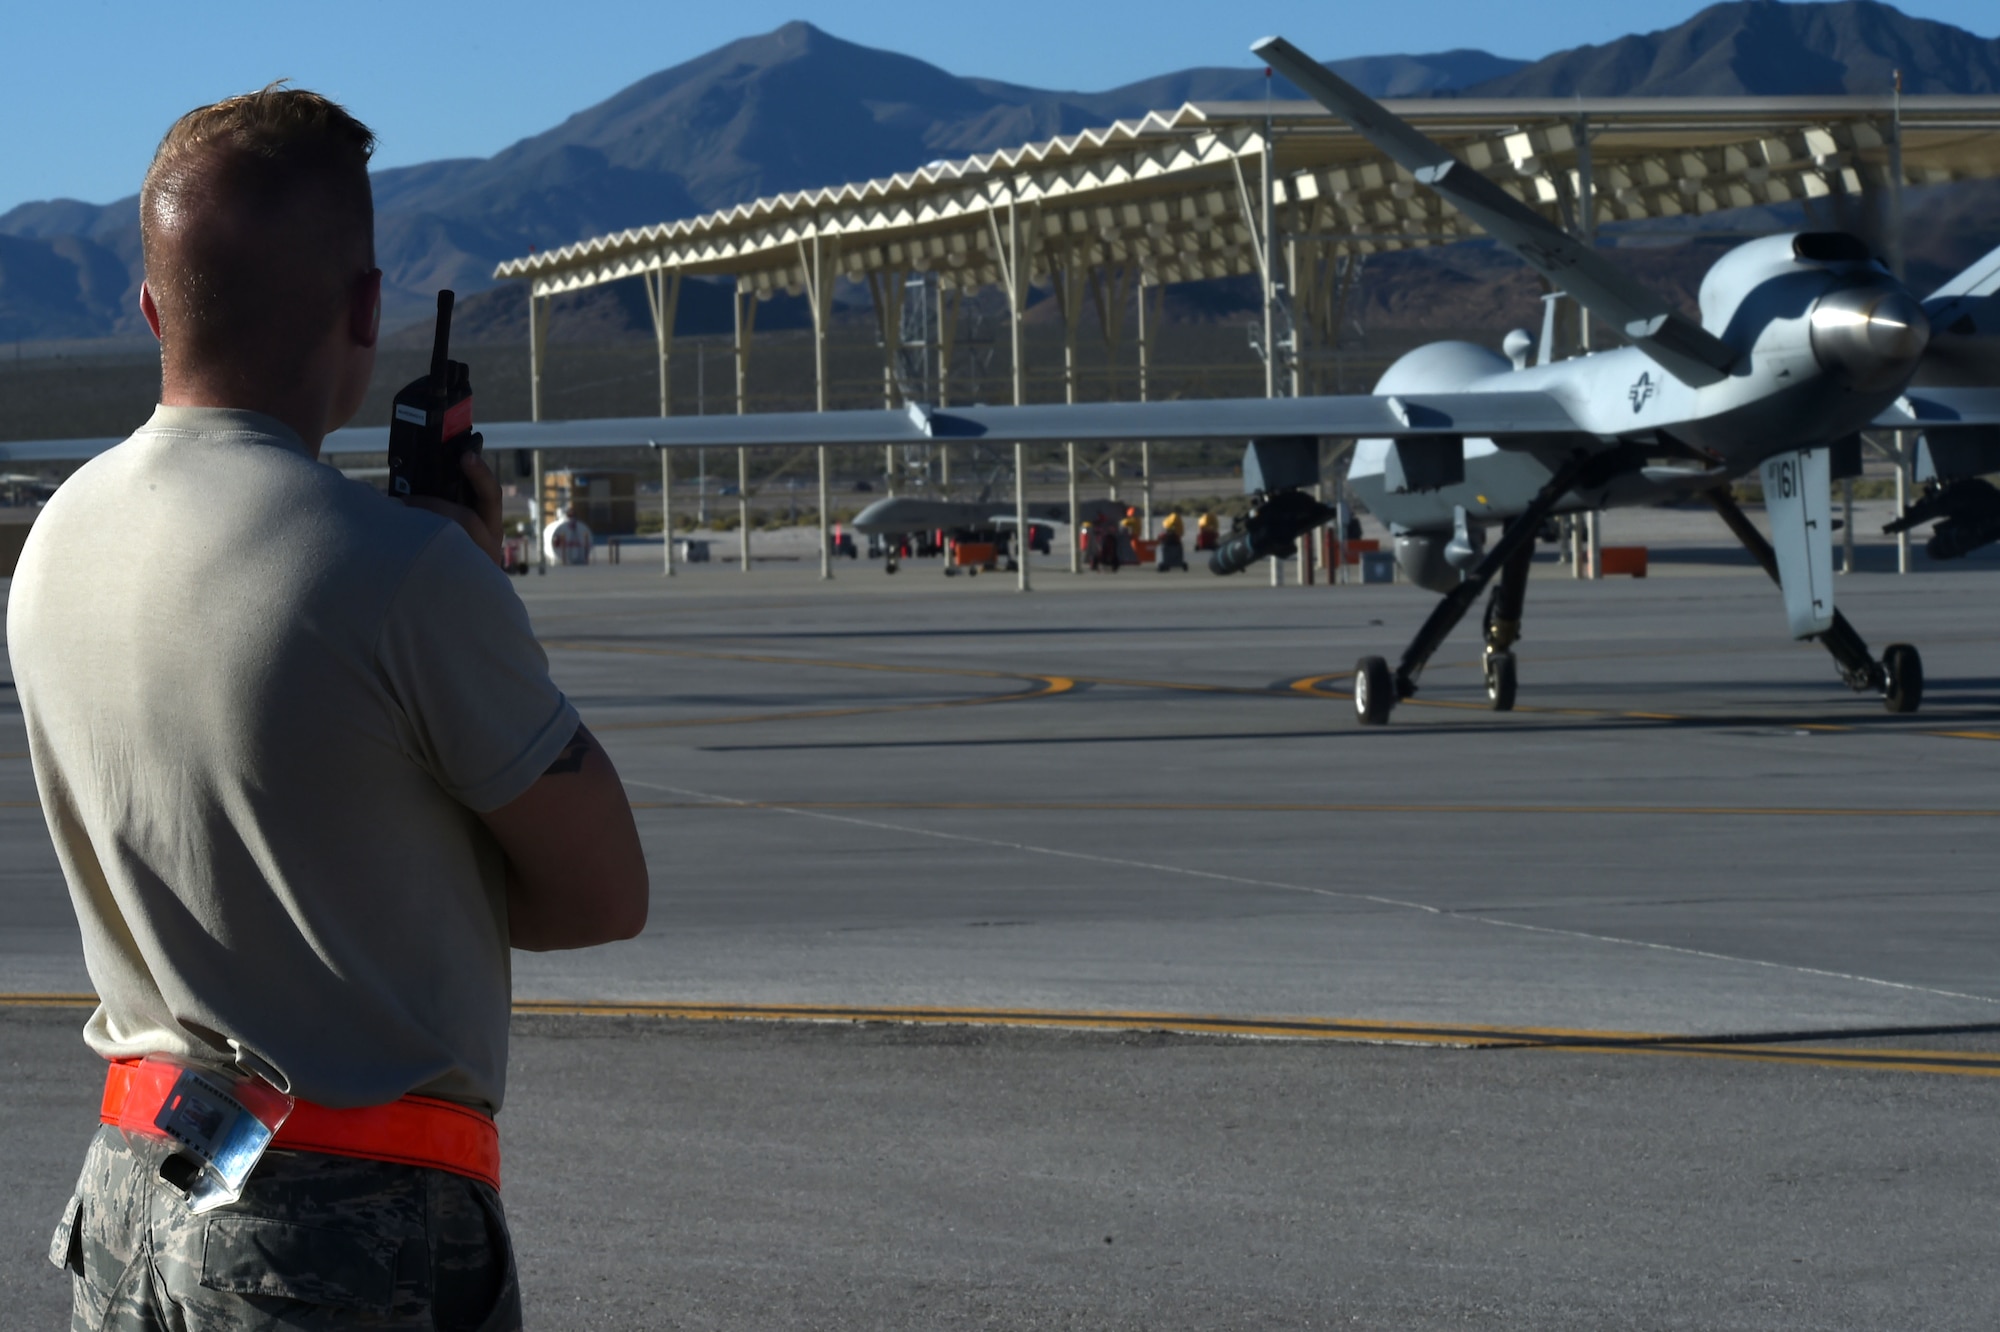 Airman 1st Class Conner, a crew chief with the 432nd Aircraft Maintenance Squadron, guides an MQ-9 Reaper onto the runway as it departs to support Red Flag 16-3, July 19, 2016, at Creech Air Force Base, Nevada.  Red Flag provides advanced combat training to ensure future success for military operations. (U.S. Air Force photo by Airman 1st Class James Thompson/Released)  